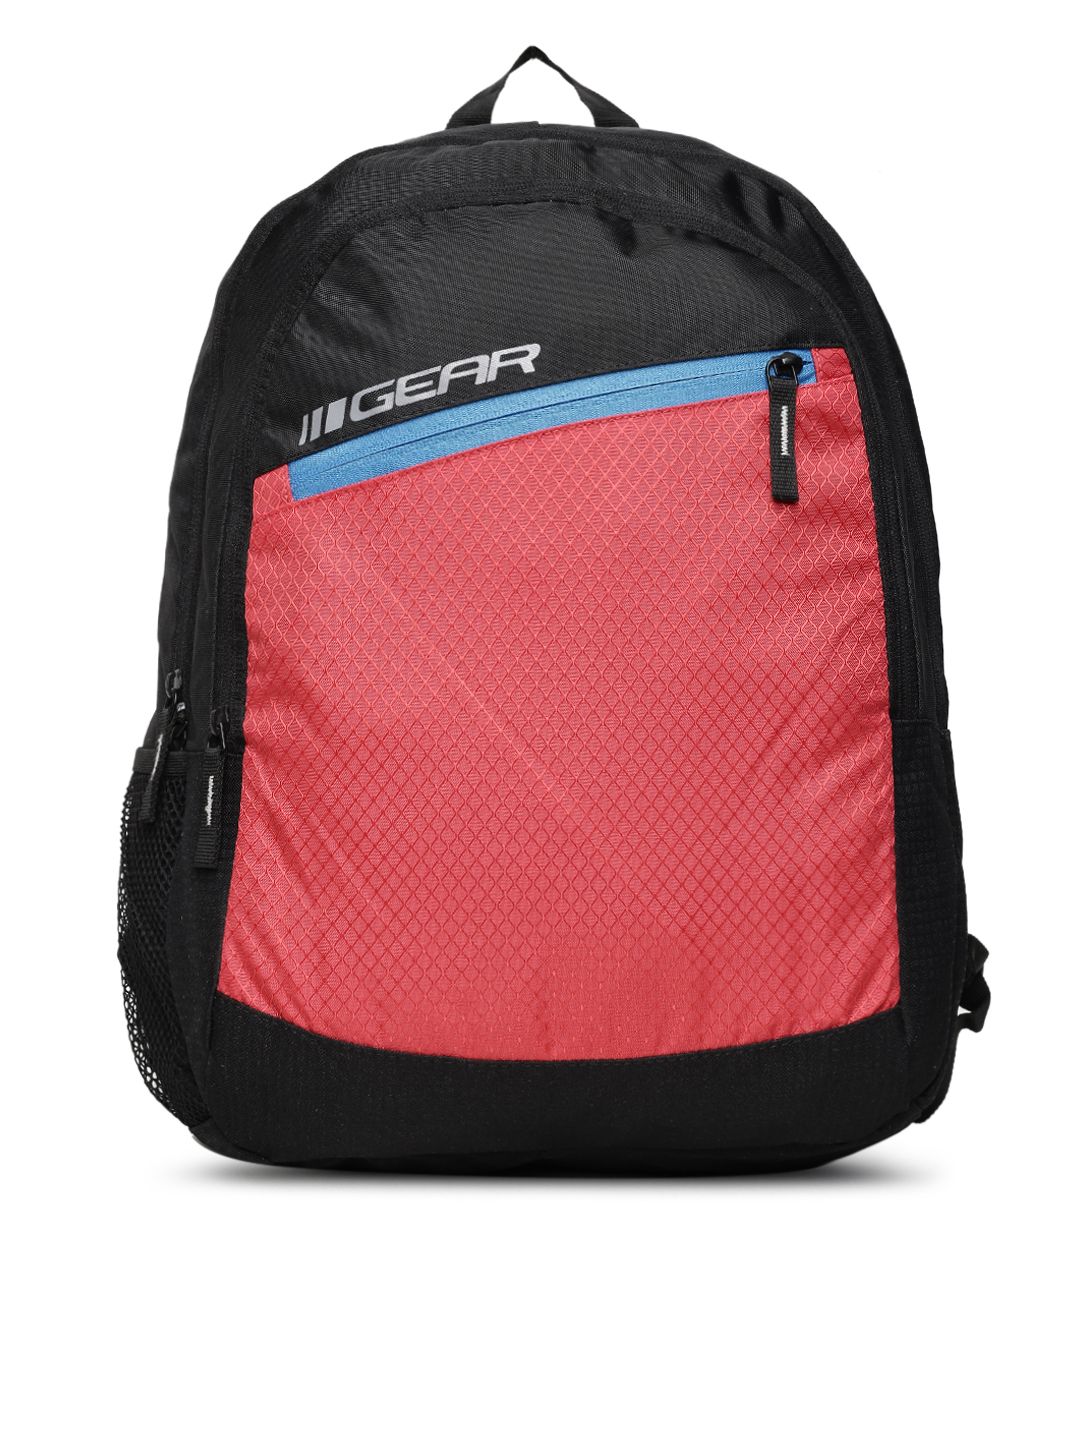 Gear Unisex Black & Red Brand Logo Backpack Price in India